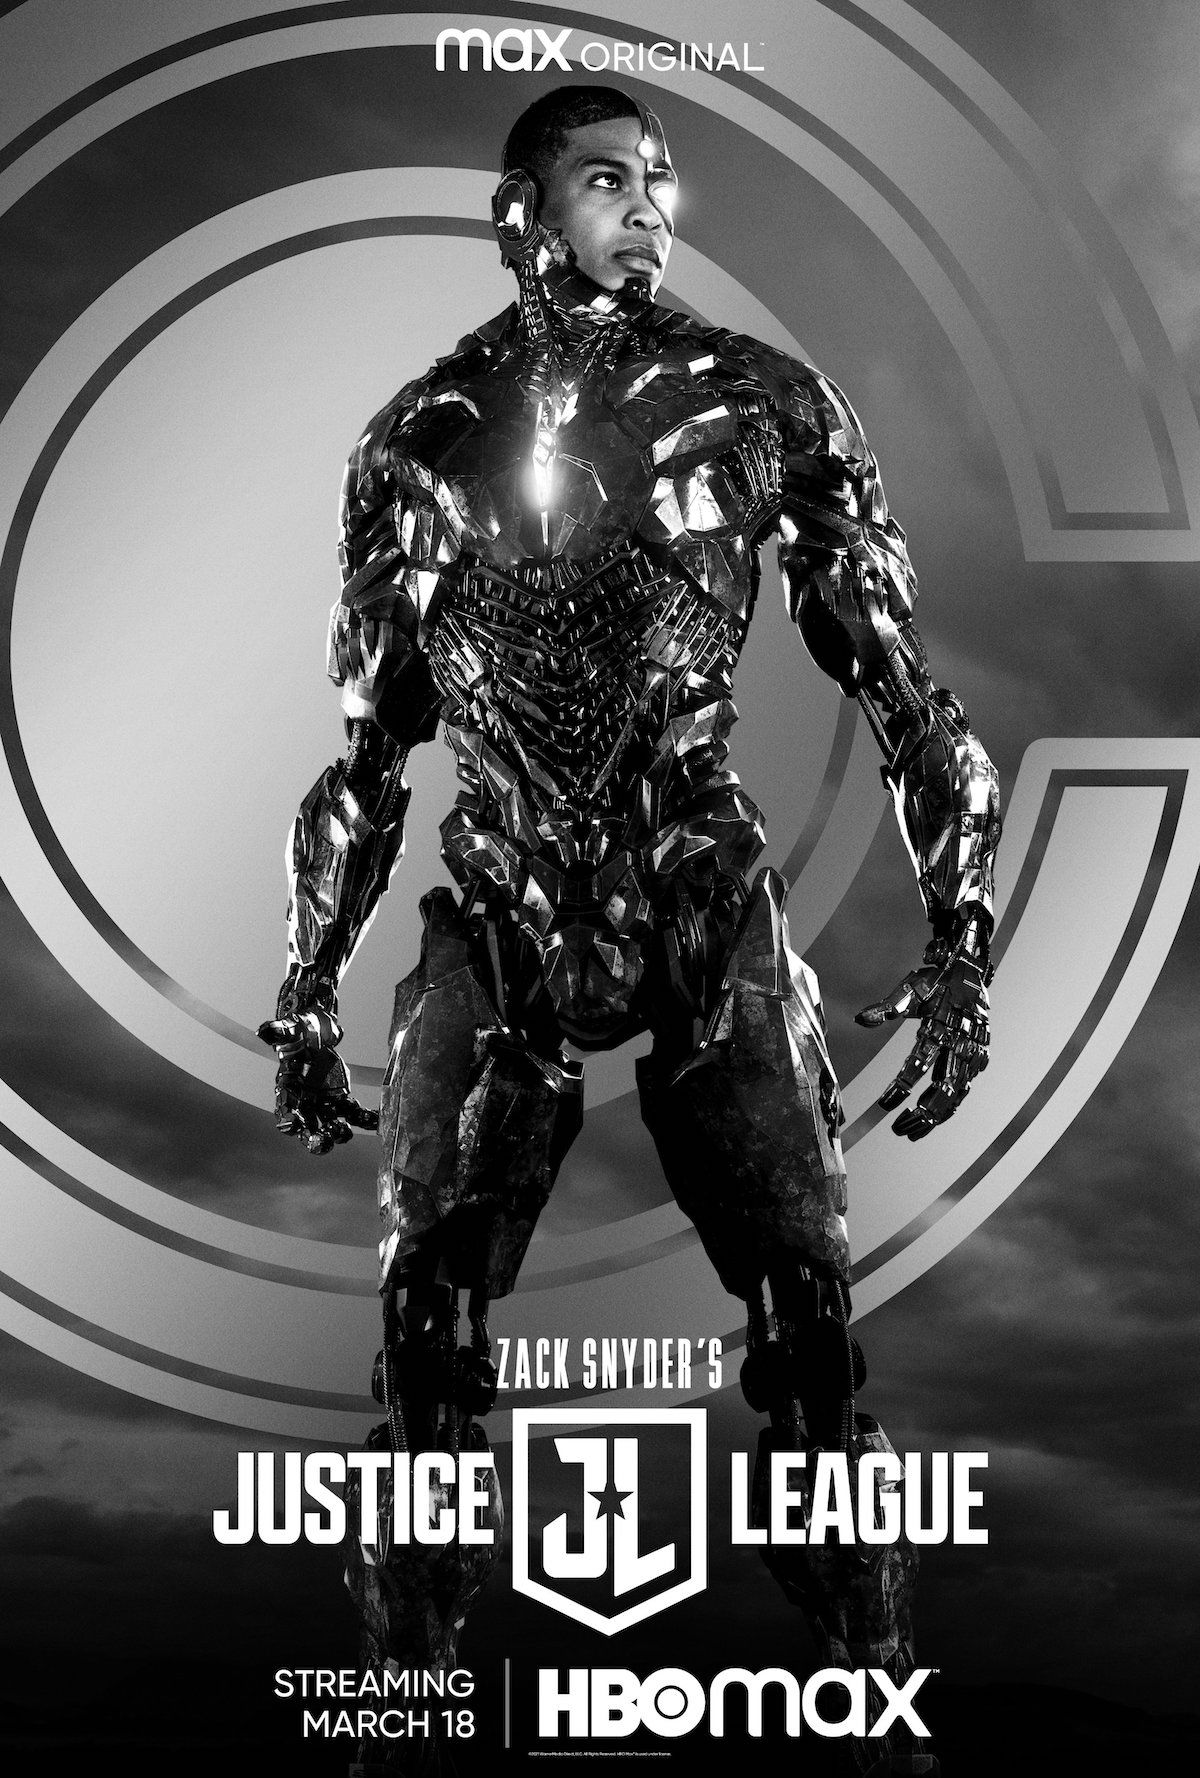 Ray Fisher as Cyborg in Zack Snyder's Justice League solo poster